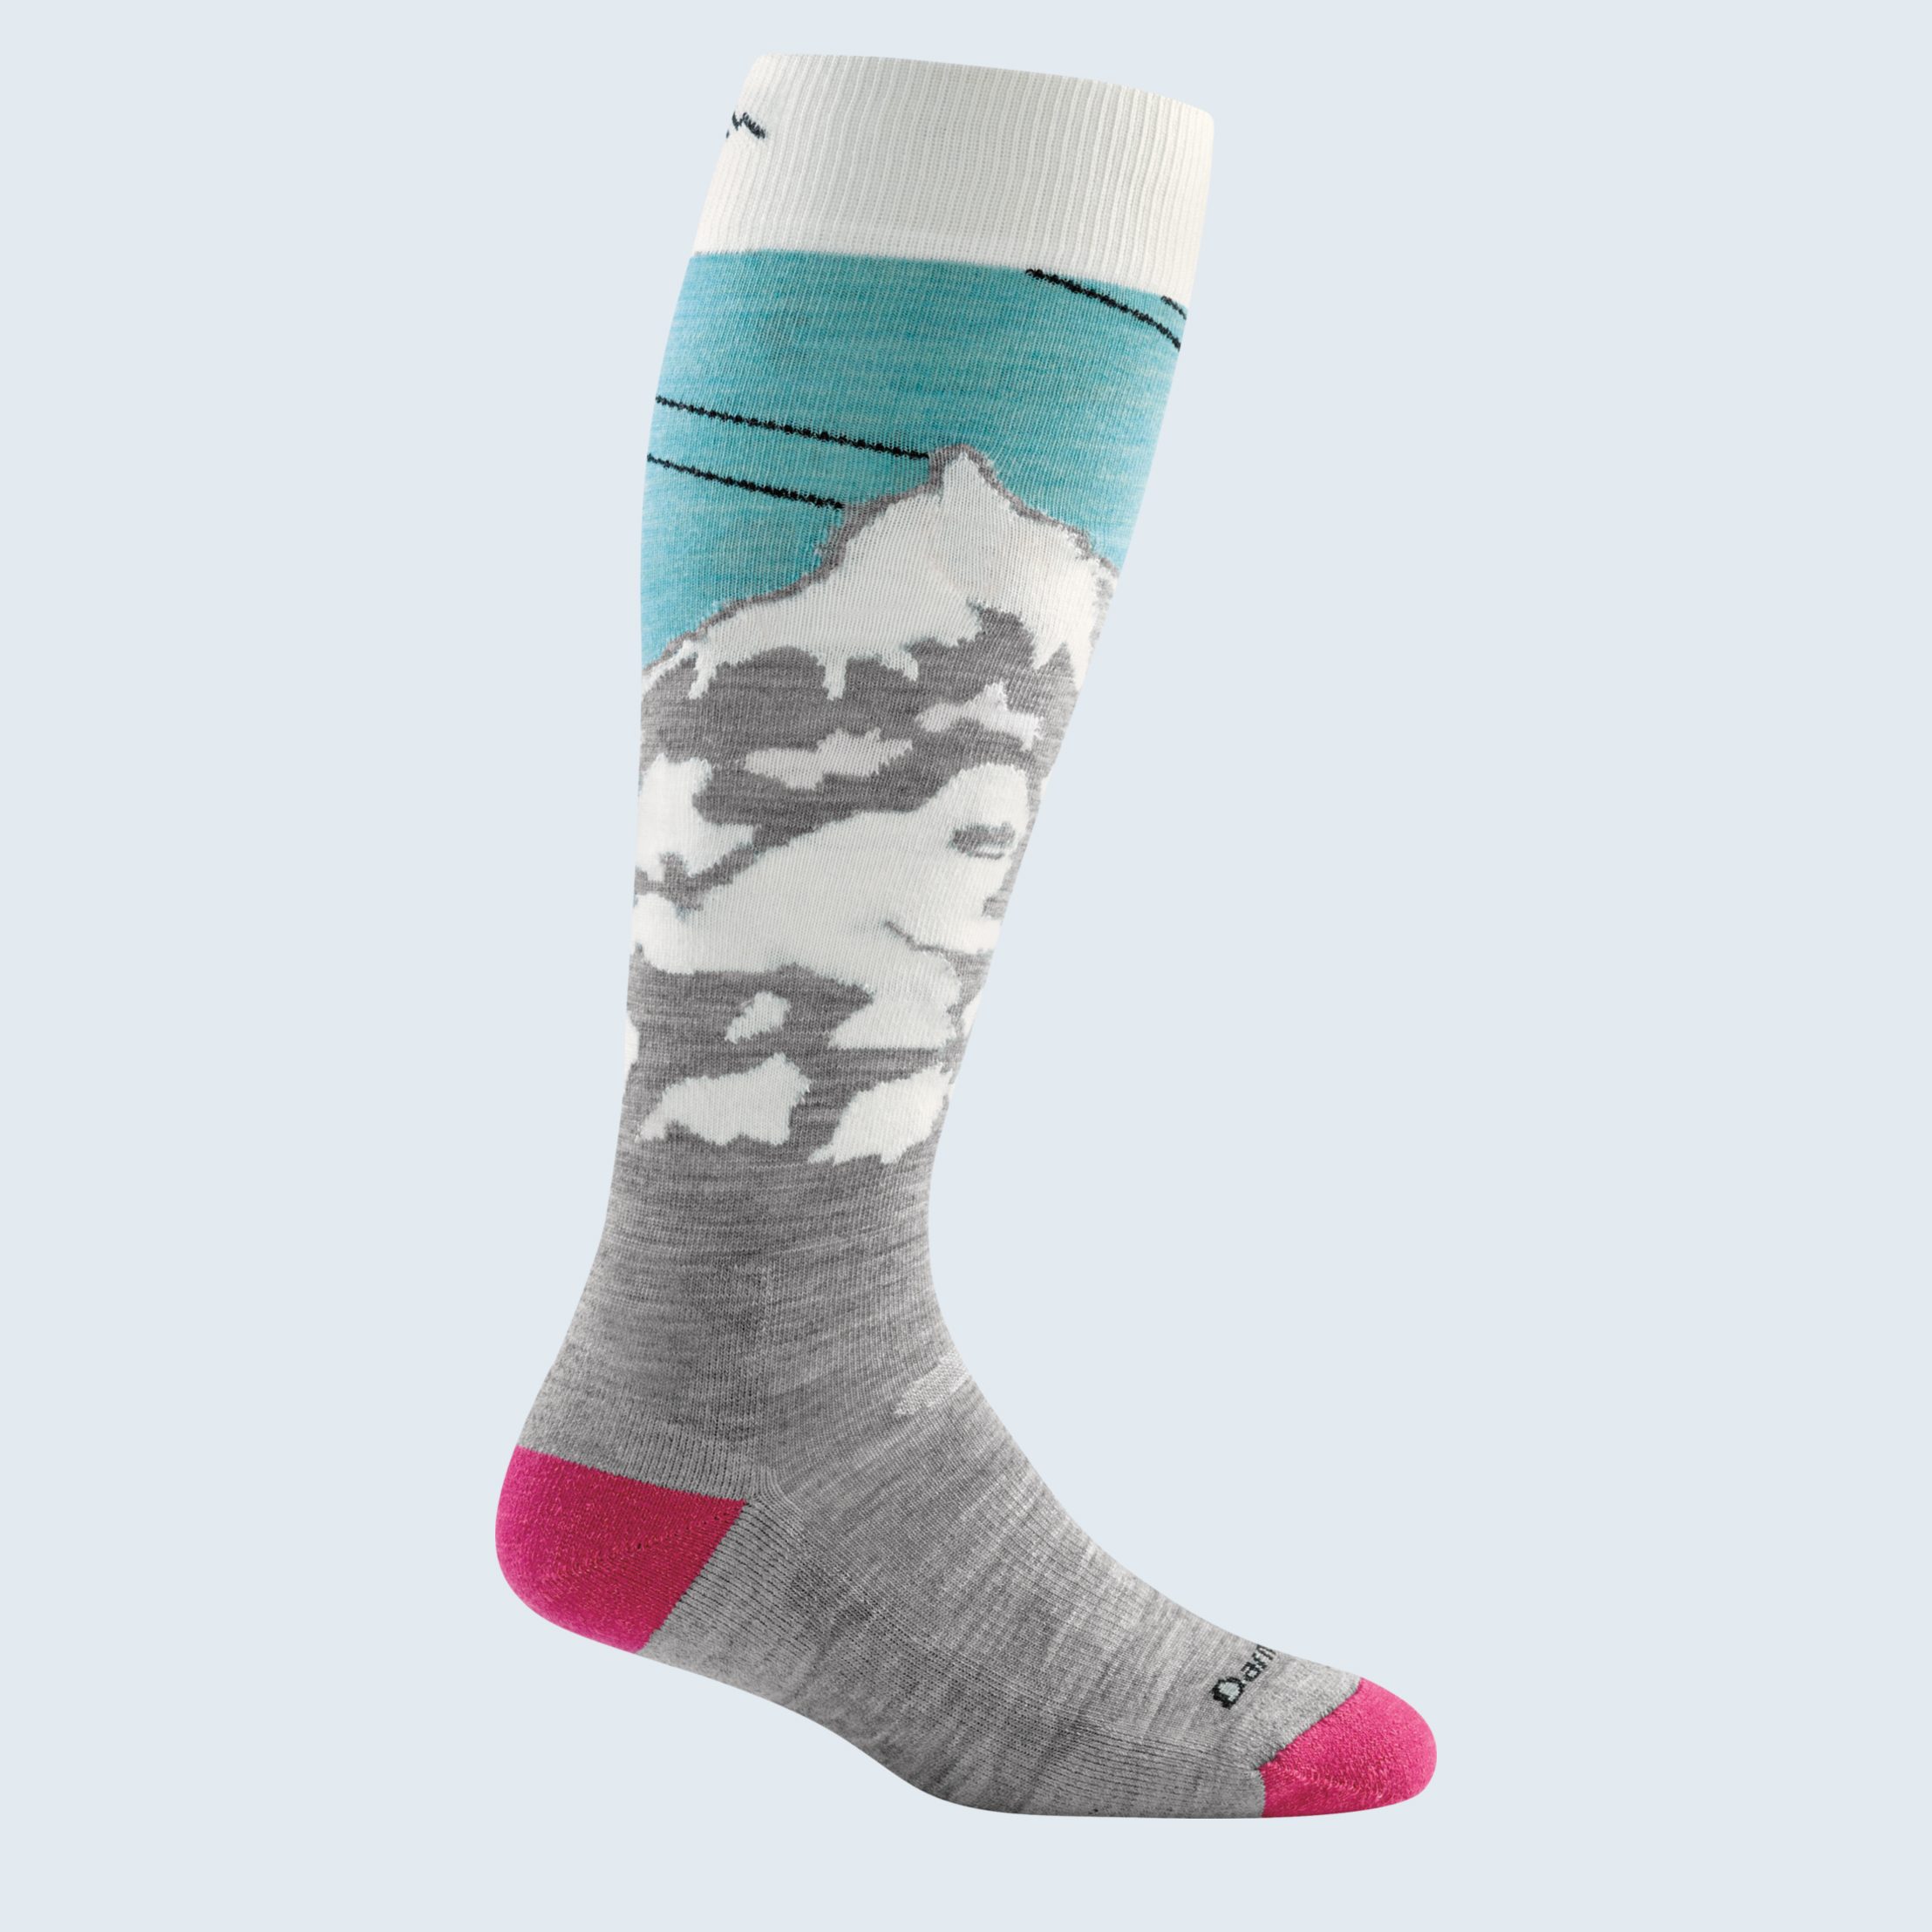 Dry & Comfortable Meister Performance Wool Blend Over-The-Calf Socks Heather Gray Warm